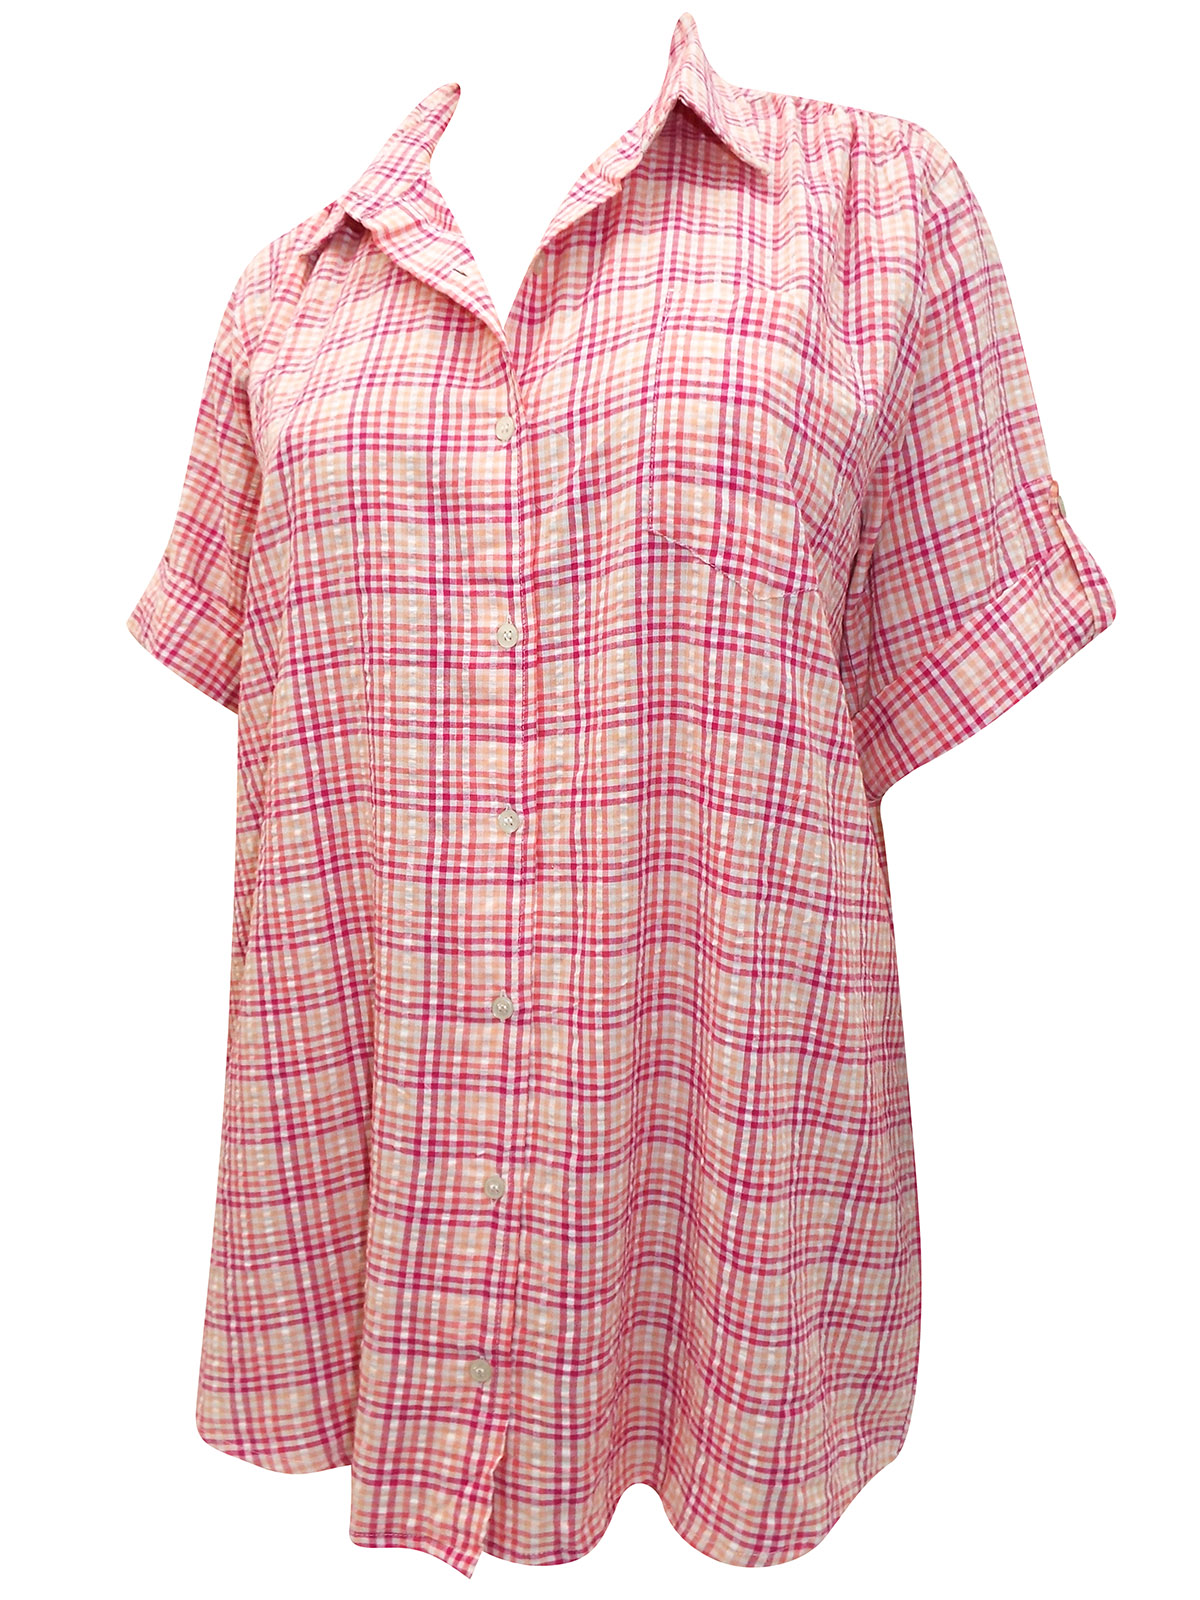 Woman Within - - Woman Within PINK Pure Cotton Checked Short Sleeve ...